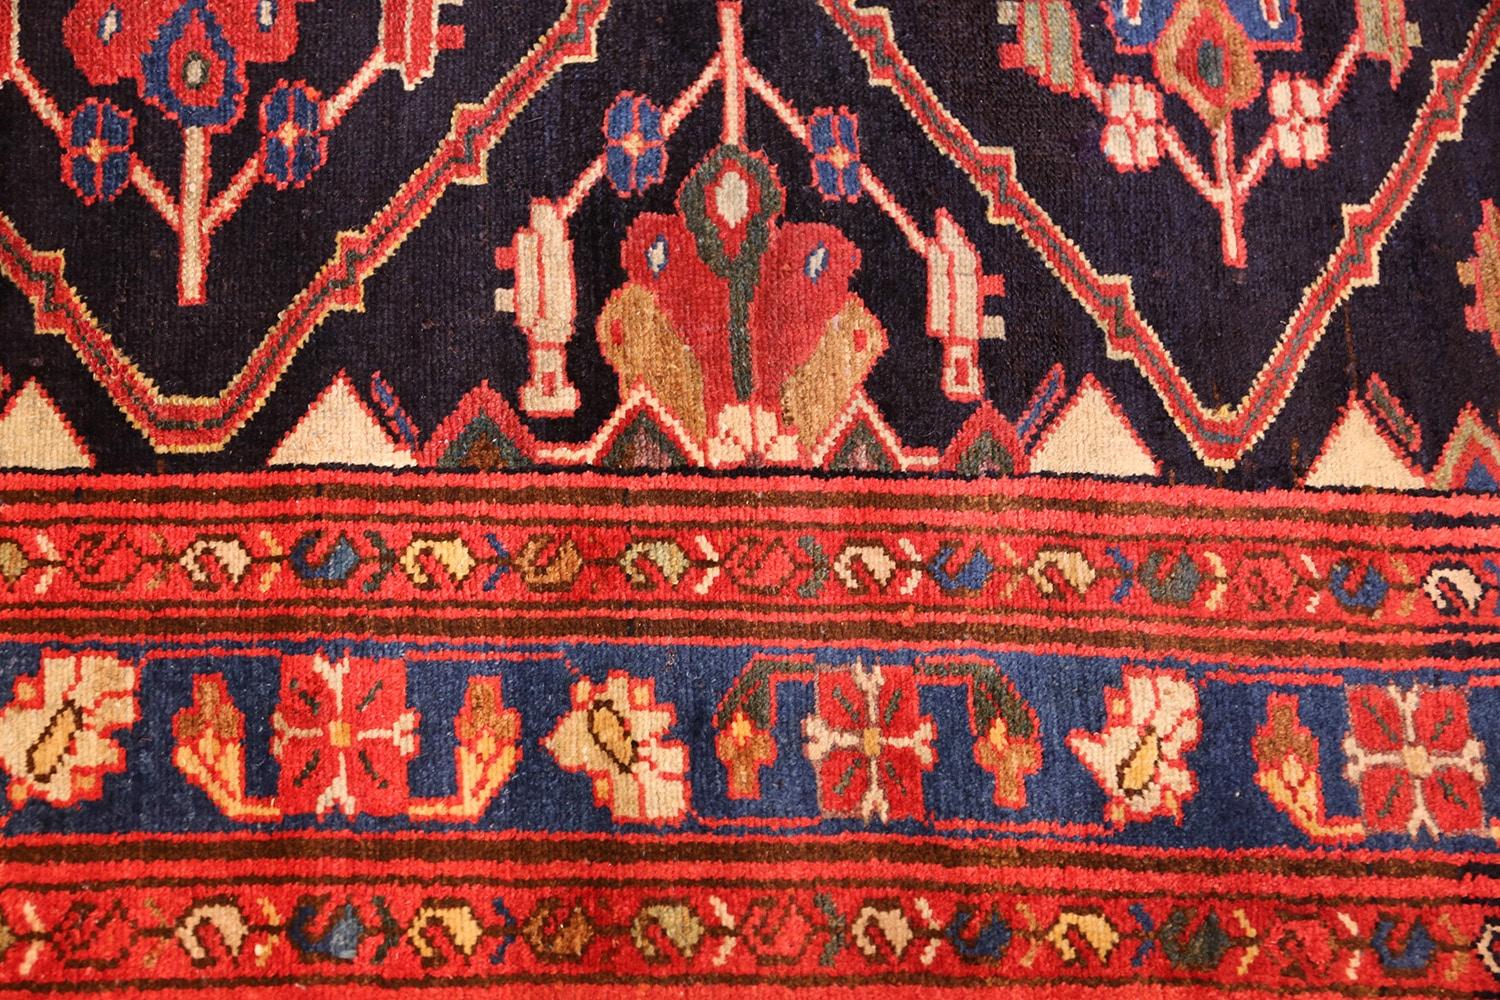 Antique Persian Malayer runner rug, country of origin: Persia, circa 1920. Size: 3 ft 4 in x 16 ft 6 in (1.02 m x 5.03 m).
 